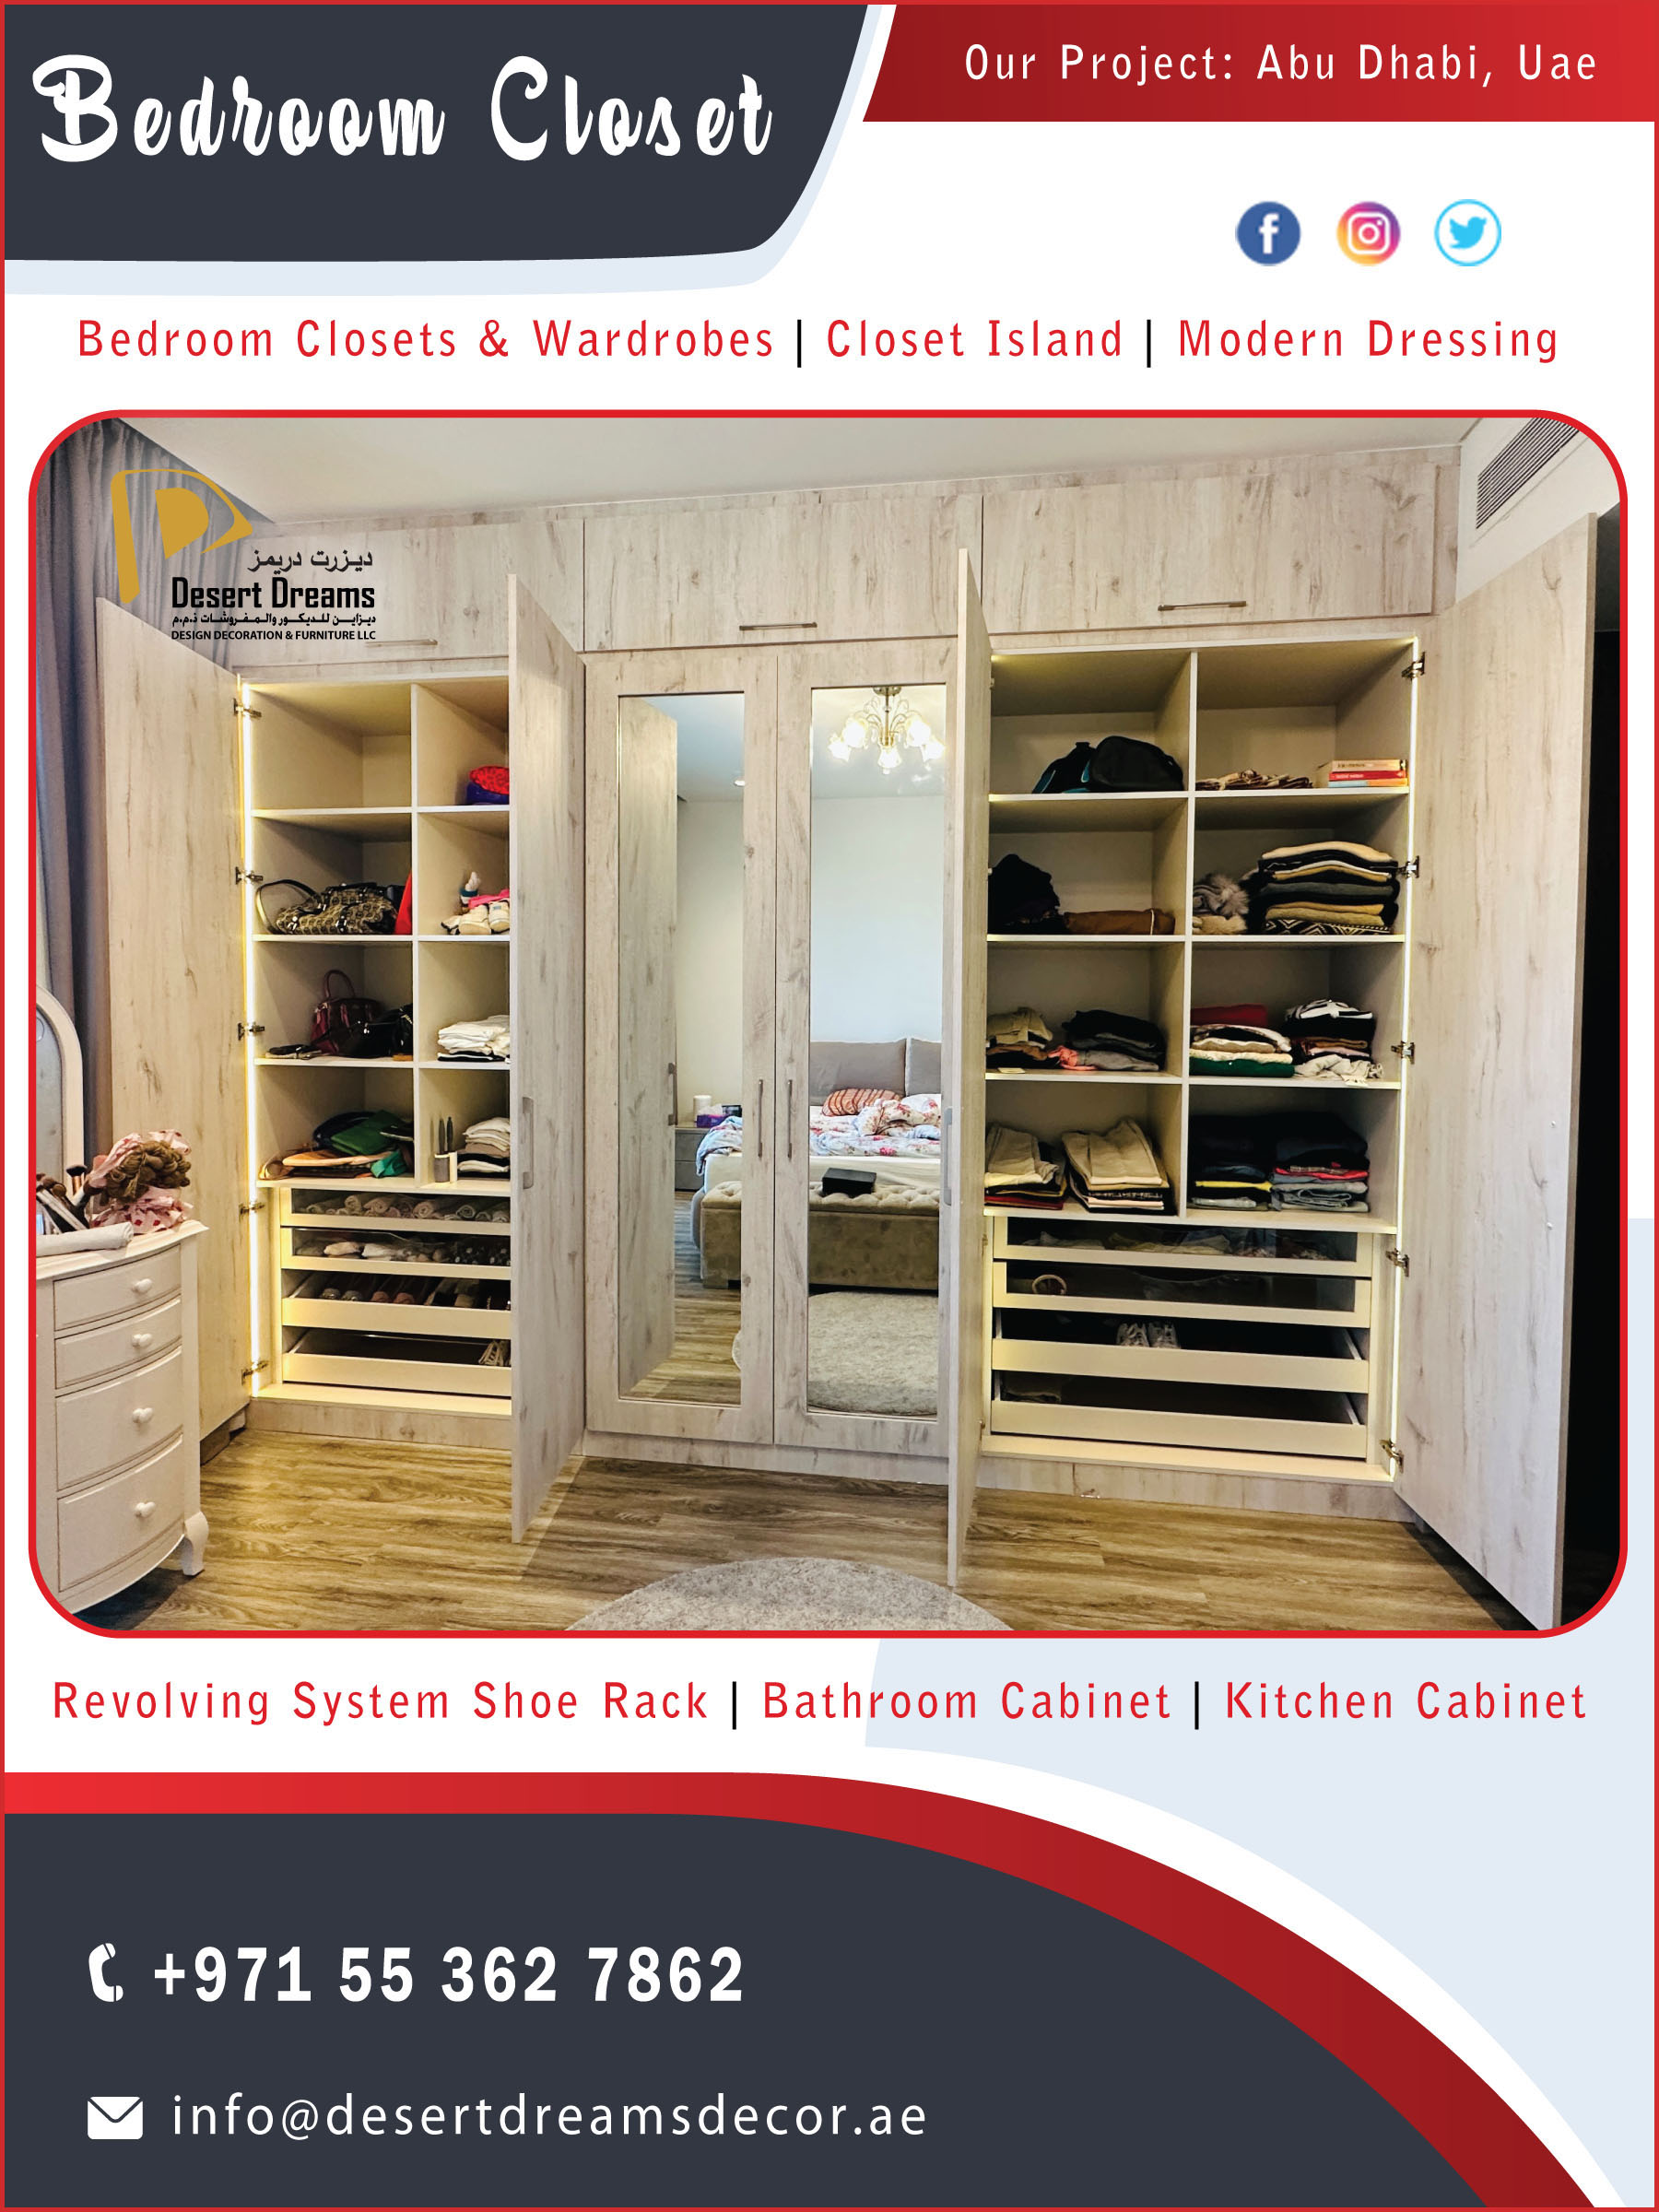 Premium Quality Closets and Wardrobes in Abu Dhabi, MDF Cabinets.